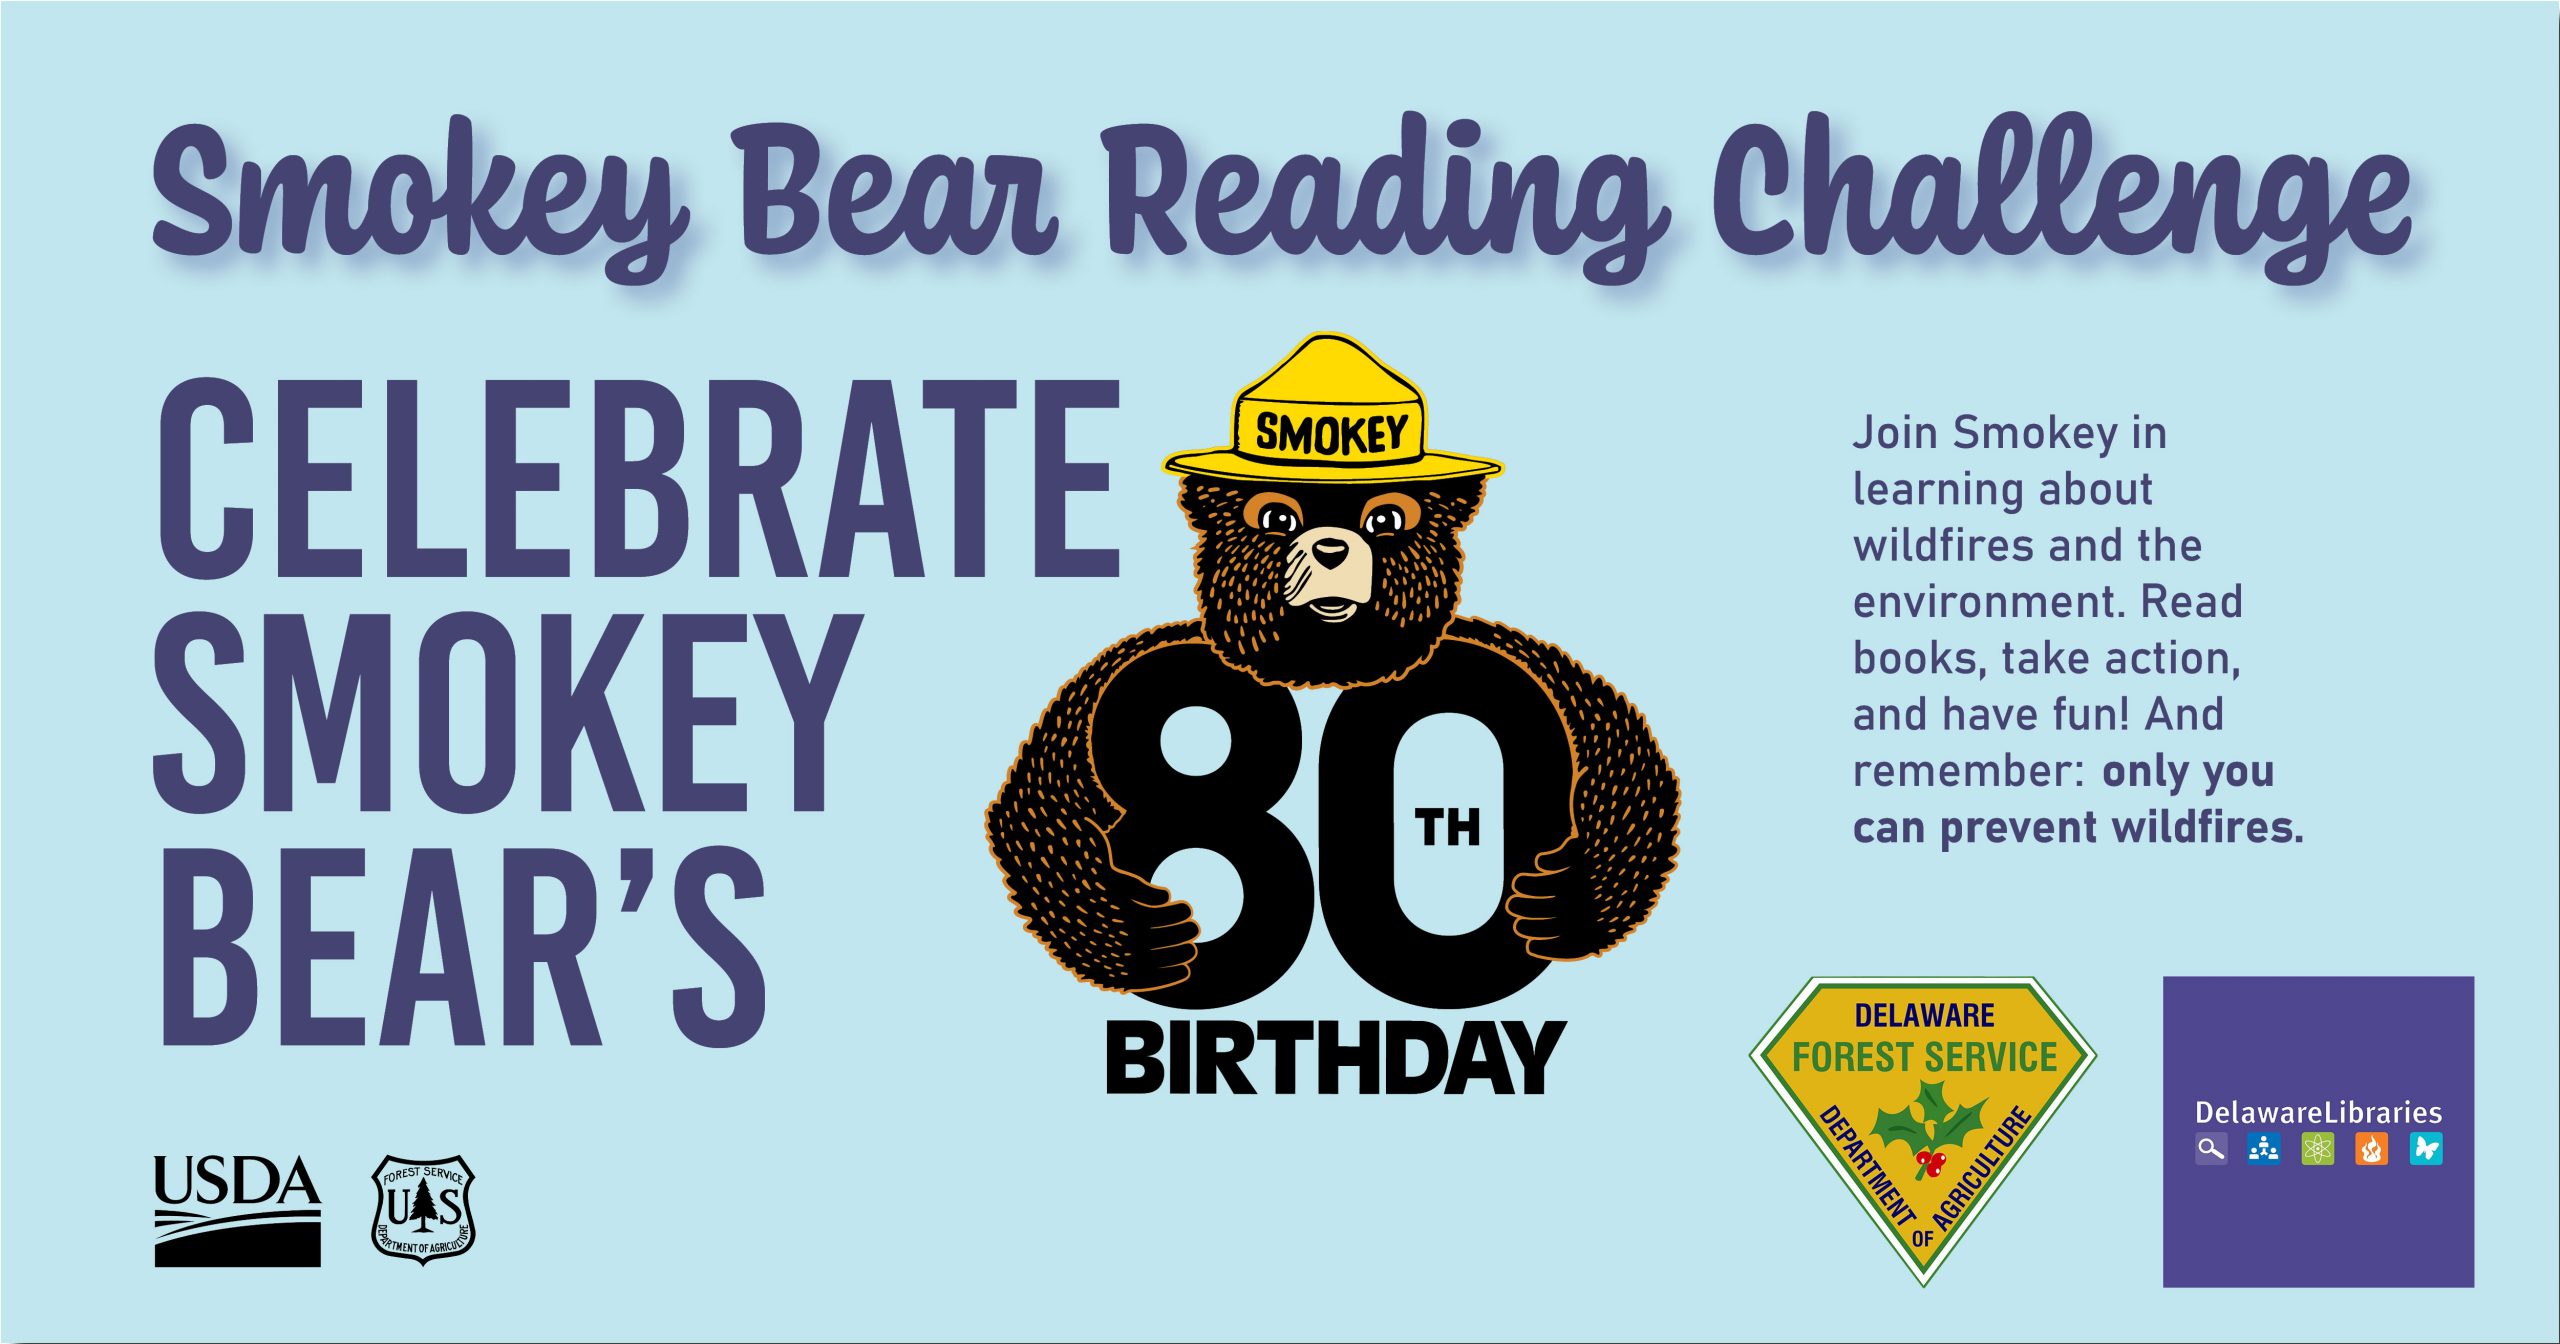 The Delaware Forest Service is coordinating a statewide Smokey Bear Library Tour in 2024 to promote the Reading Challenge and deliver programming on wildfire prevention and nature education to Delaware communities.